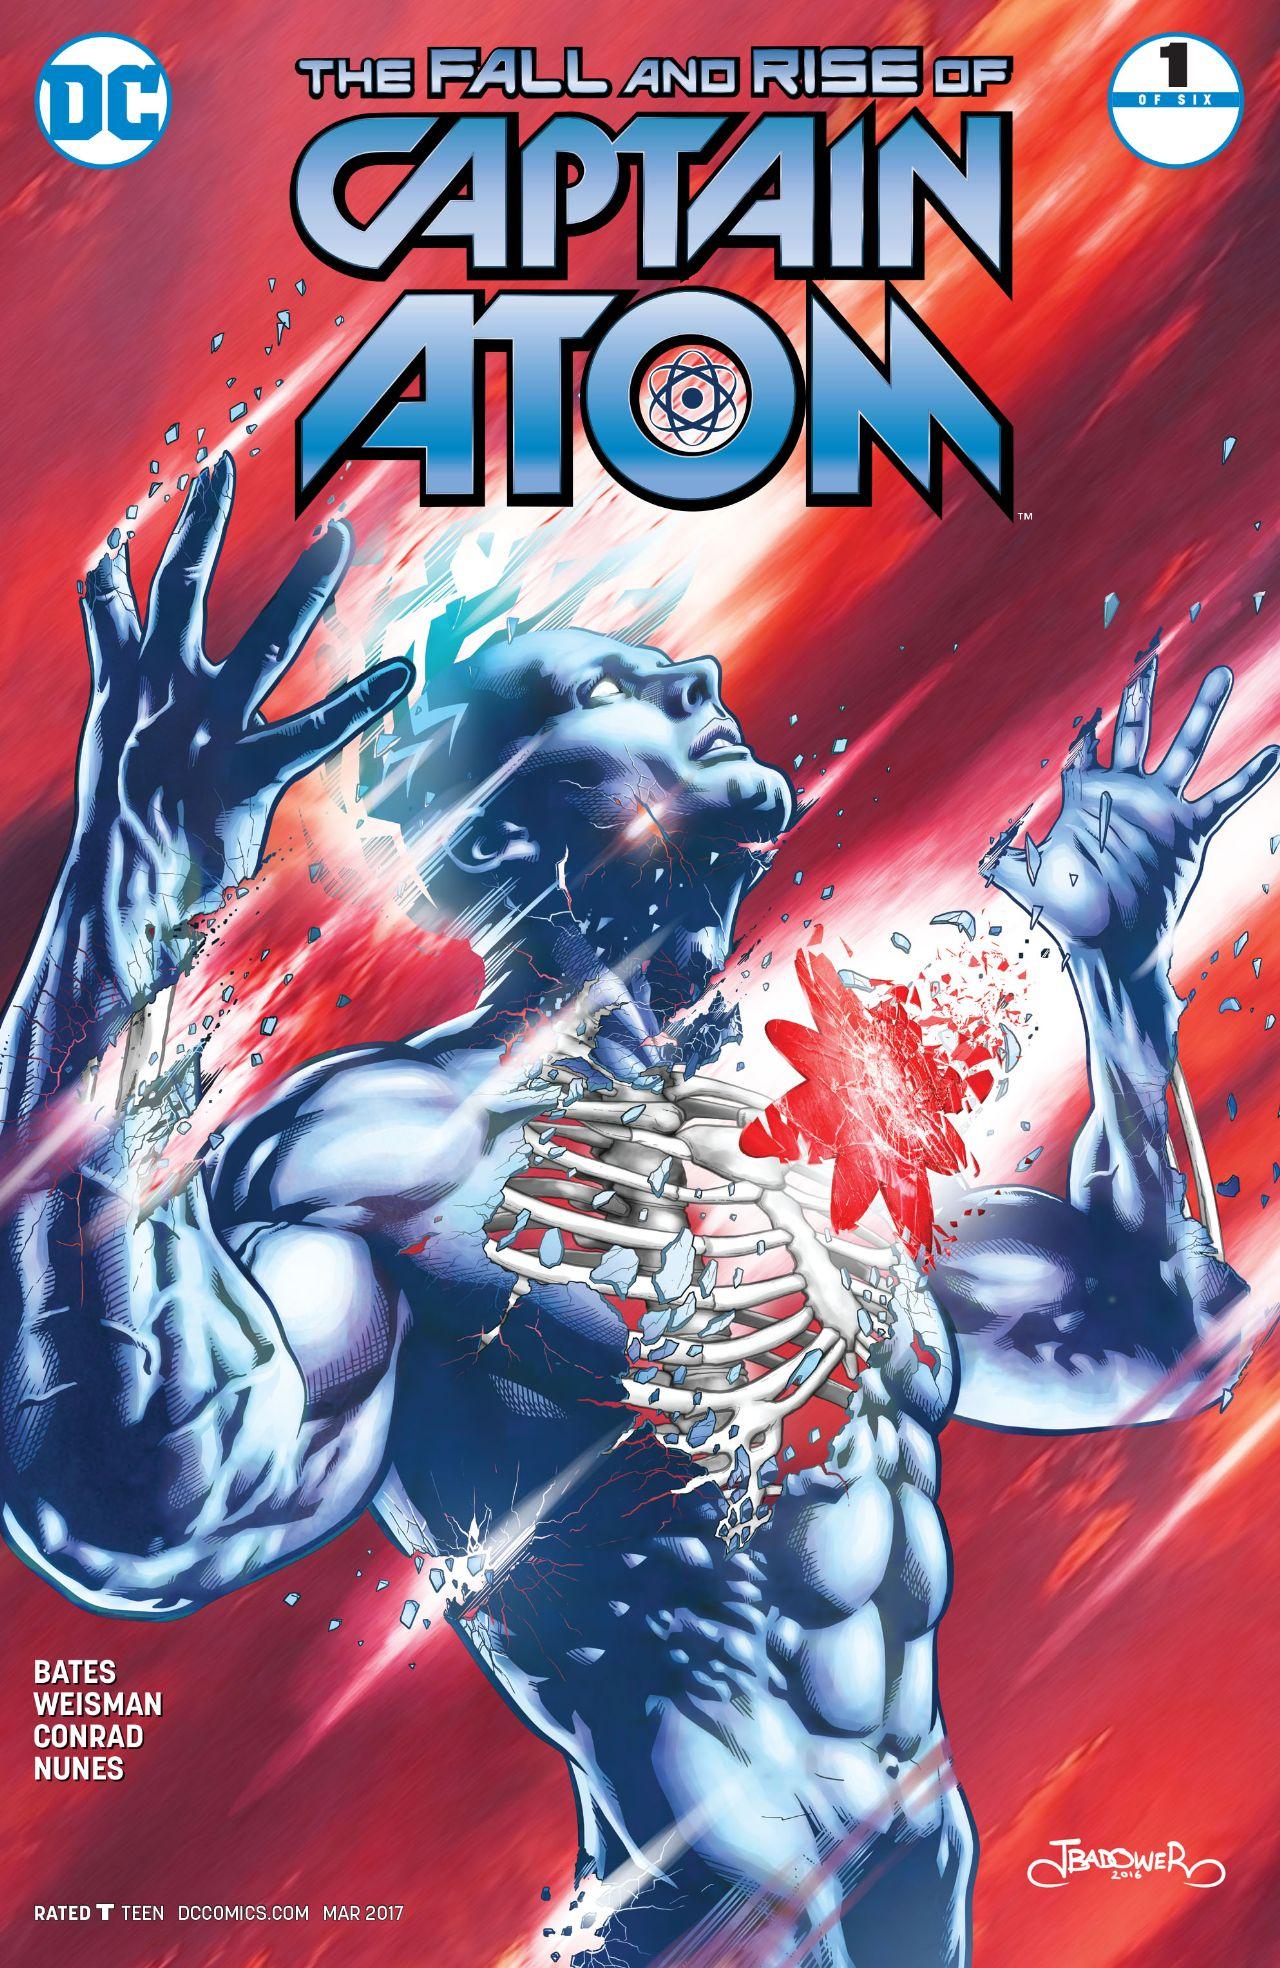 The Fall and Rise of Captain Atom Vol. 1 #1